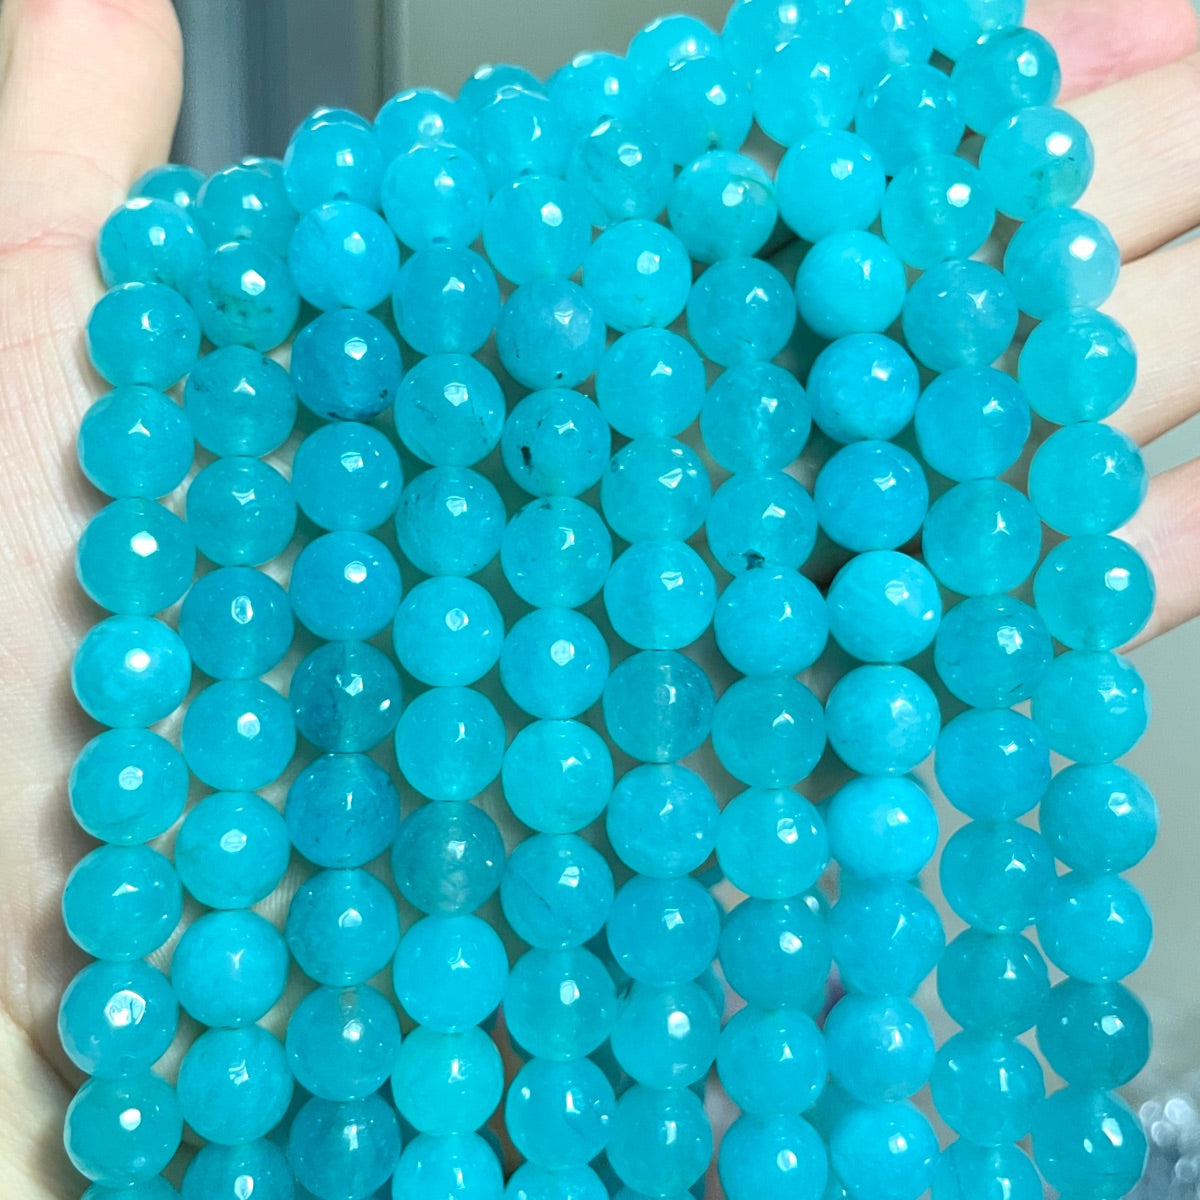 2 Strands/lot 10mm Turquoise Blue Faceted Jade Stone Beads Stone Beads Faceted Jade Beads New Beads Arrivals Charms Beads Beyond